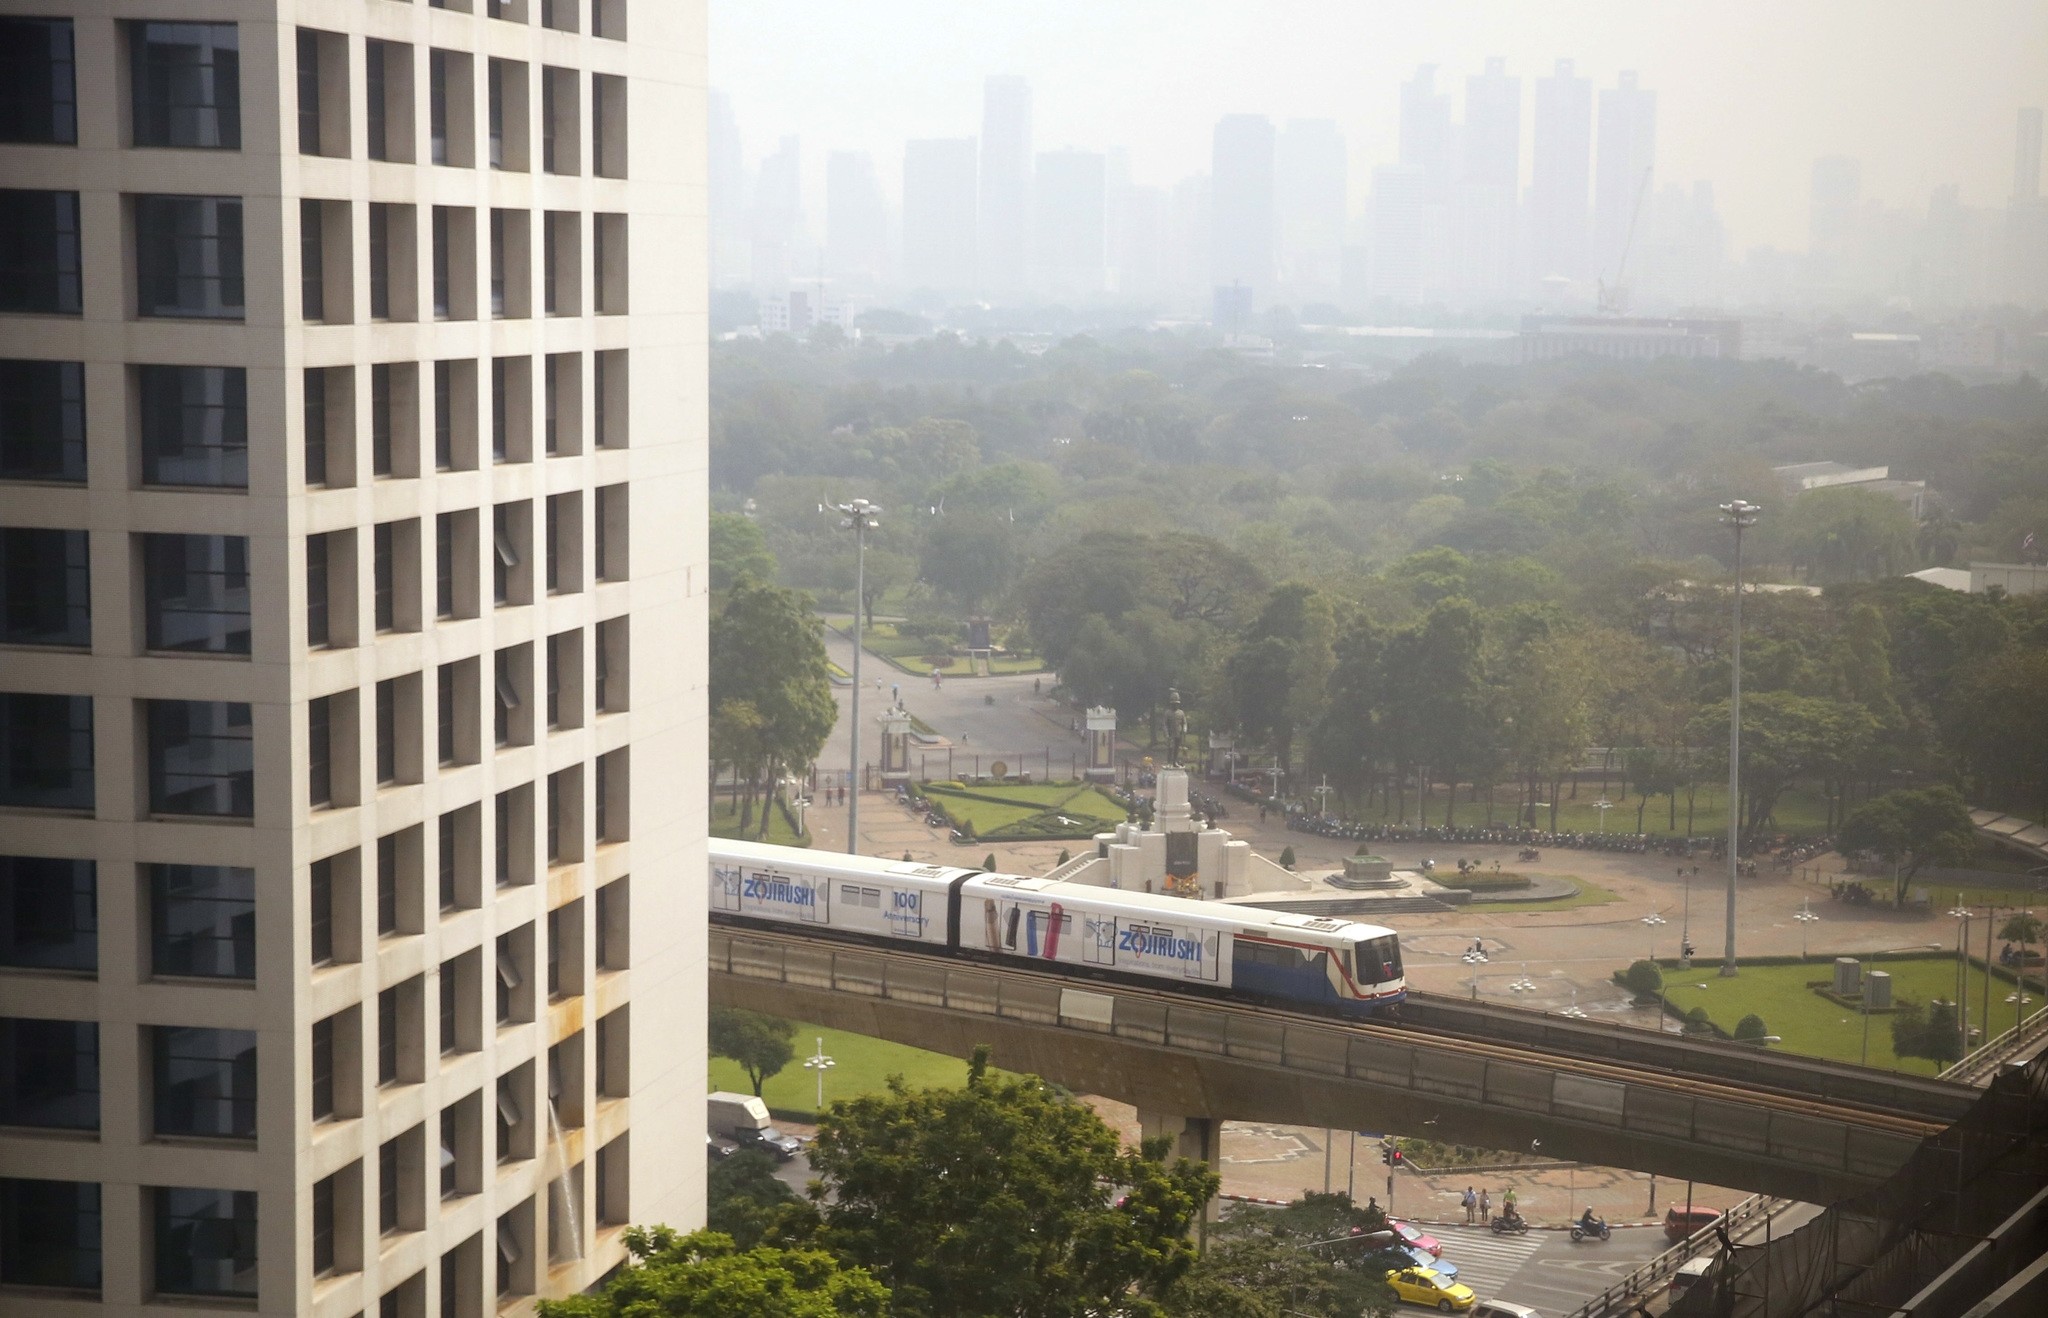 An elevated train passes in front of the Lumpini Park covered in a thick layer of smog downtown Bangkok, Thailand, early Thursday, Feb. 8, 2018. (AP Photo)